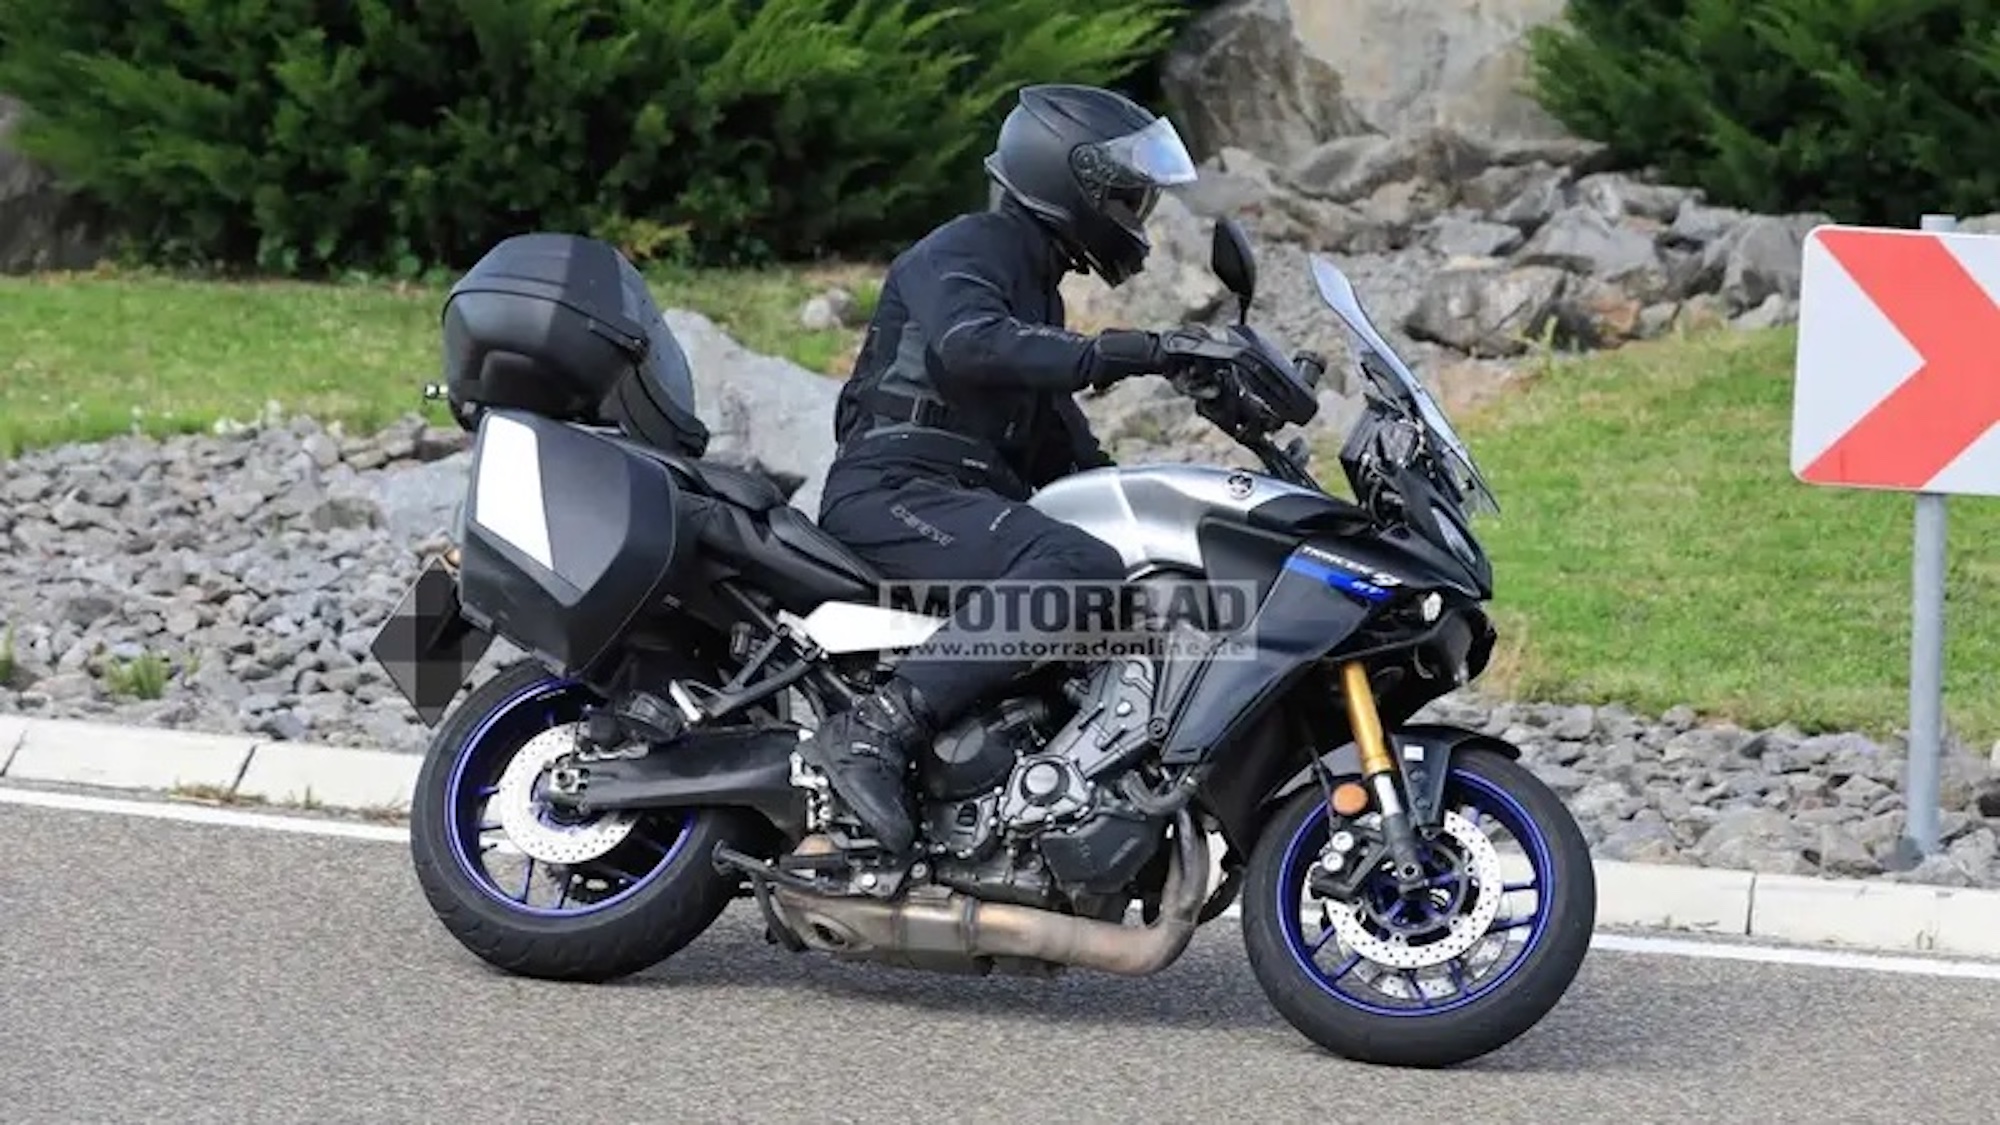 Media showing a radar system up-and-coming for Yamaha's Tracer 900 GT. Media from Top Speed, who gleaned from Motorrad.